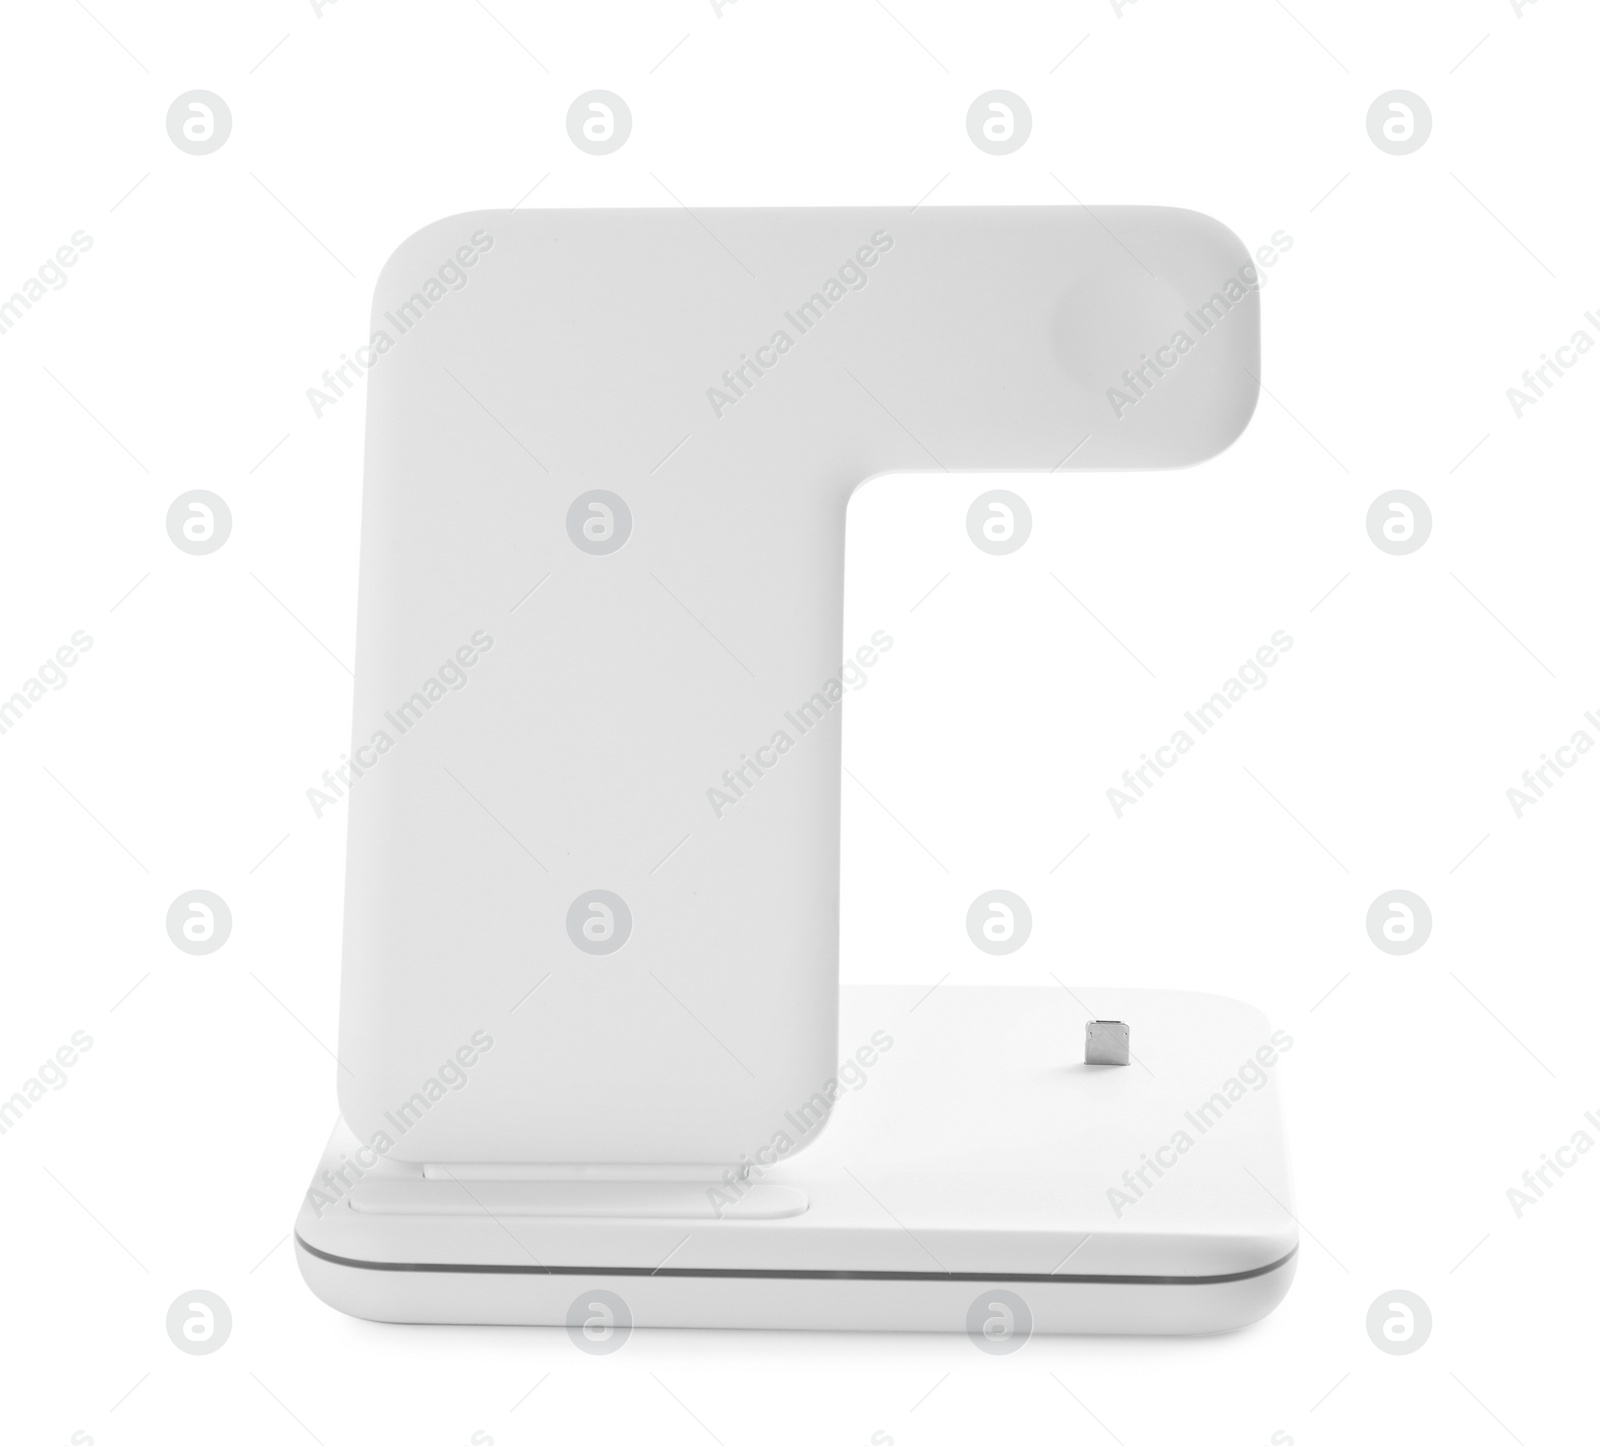 Photo of Wireless charger isolated on white. Modern technology